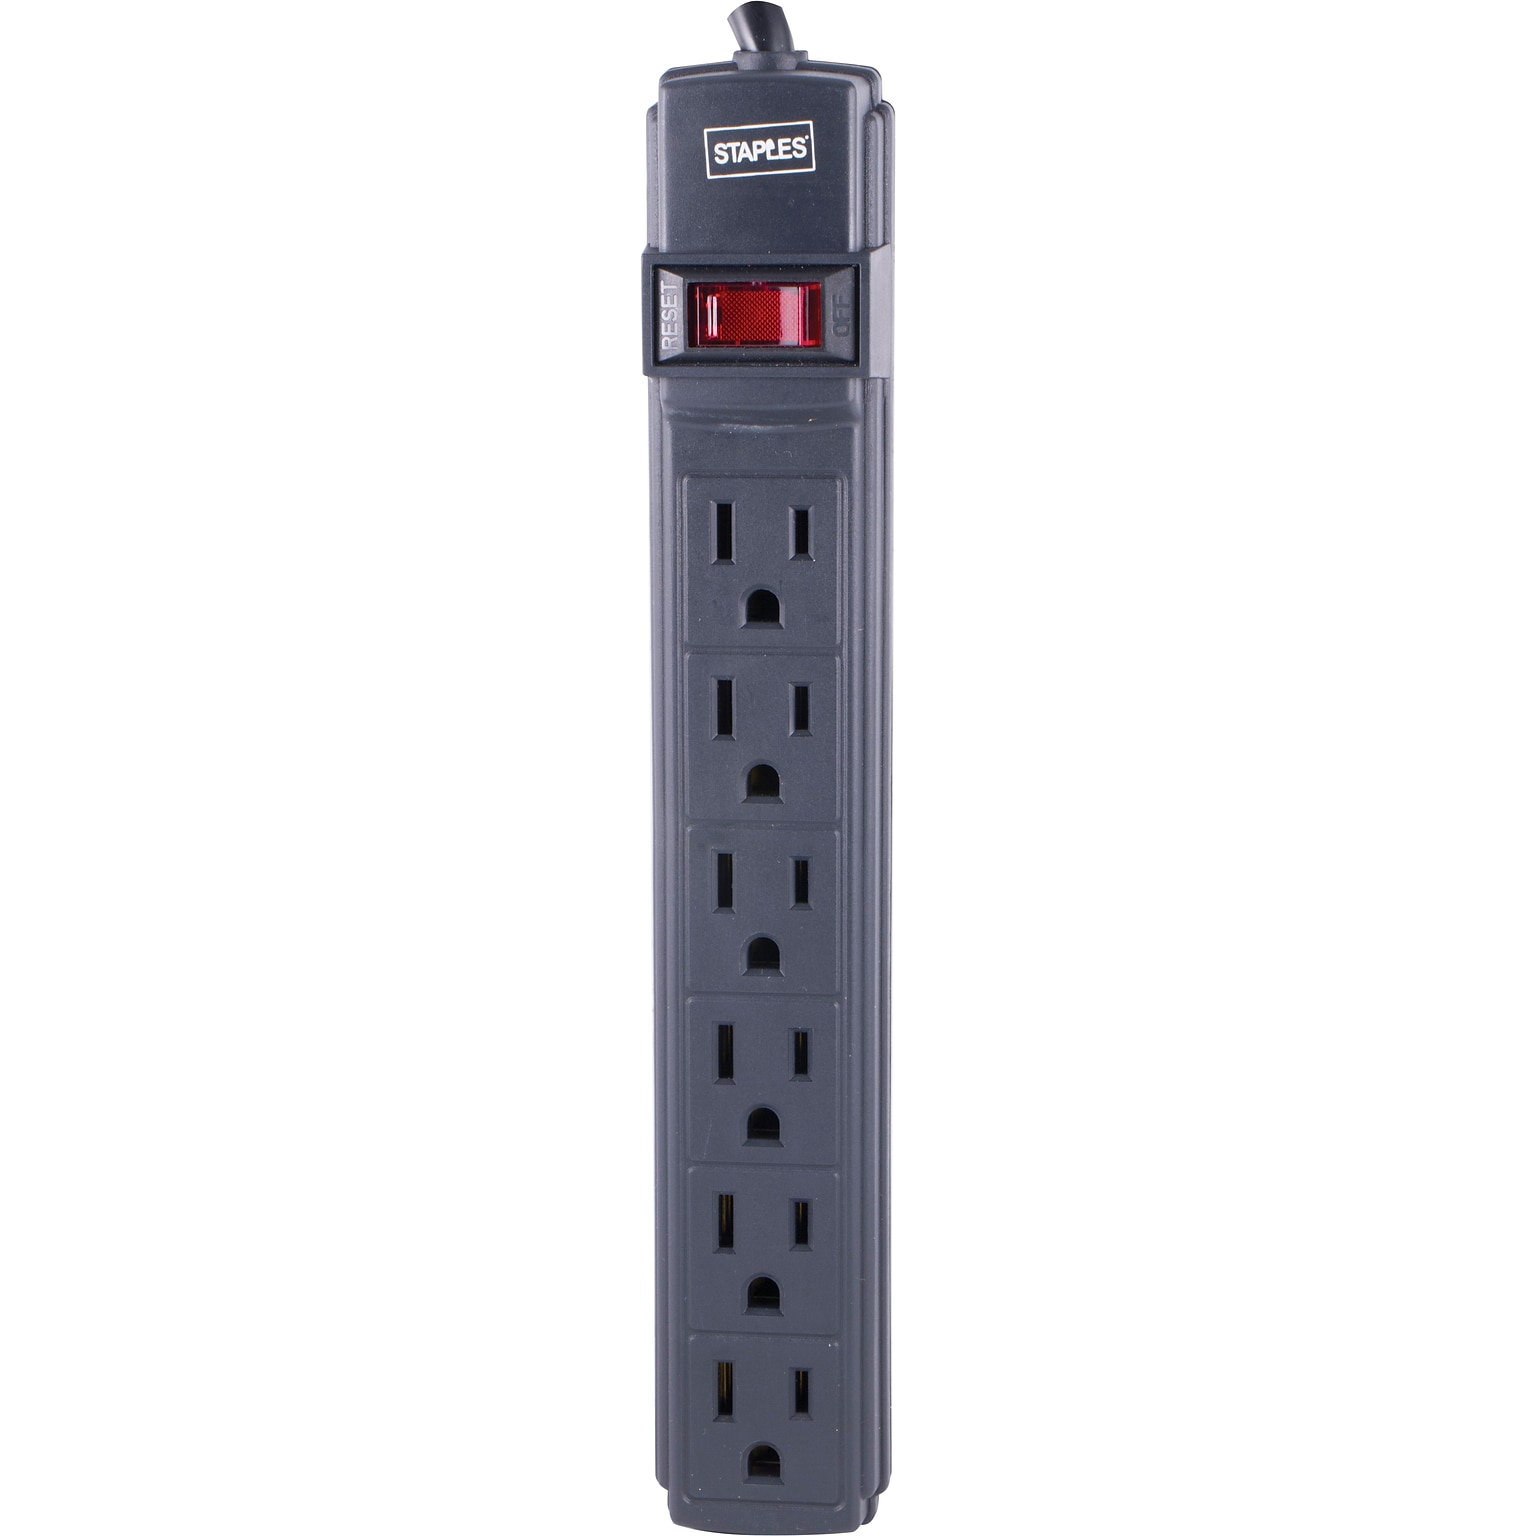 Quill Brand® 3 and 6-Outlet Power Strip, Charcoal (ST22148-CC)